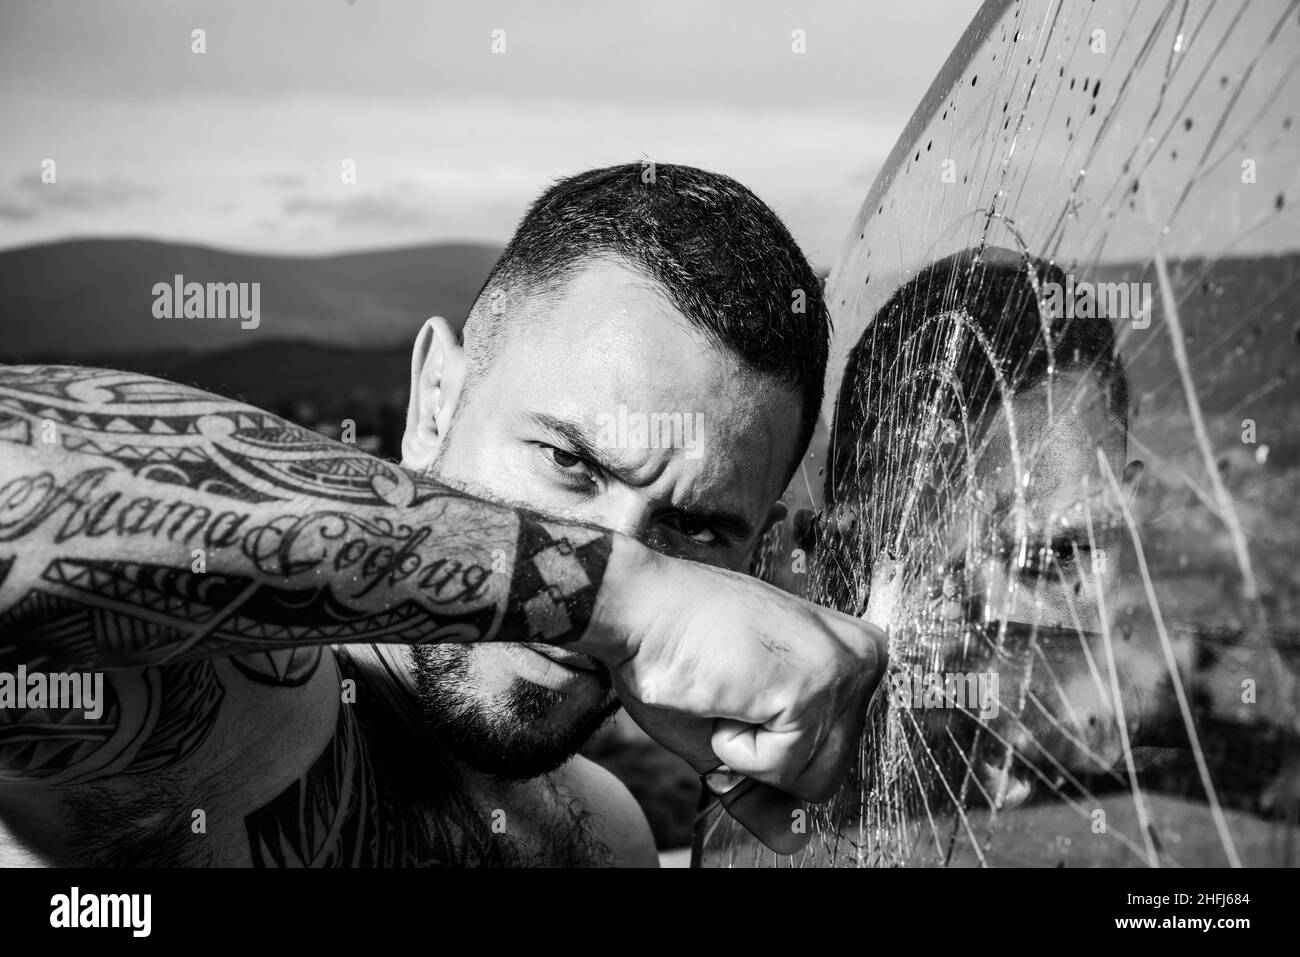 Bullet tattoo Black and White Stock Photos & Images - Alamy